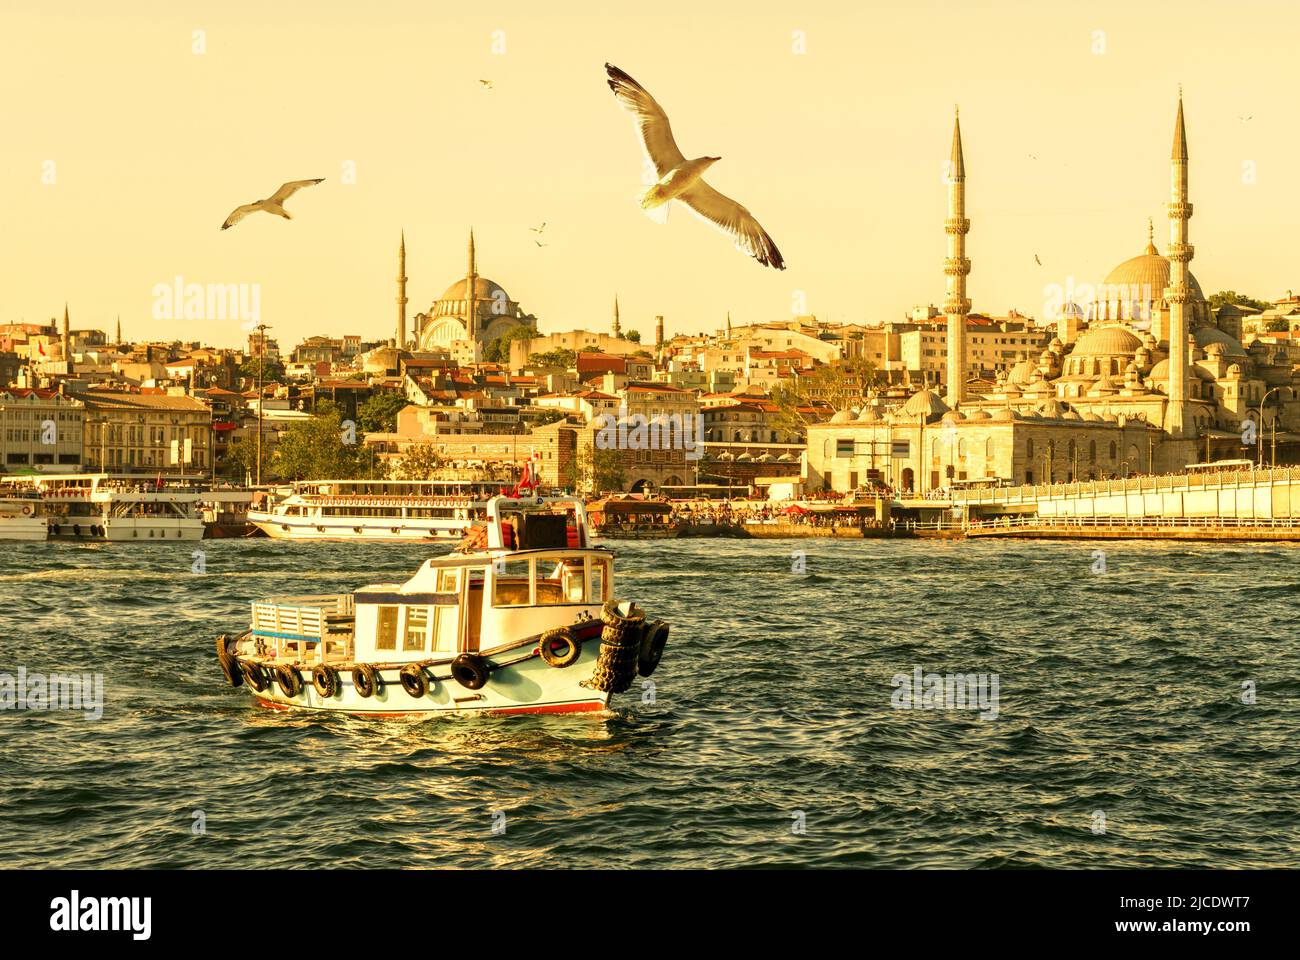 Istanbul in summer, Turkey. Boat sails on the Golden Horn, sunny view of old Istanbul town with mosques and seagulls. Concept of tourism in Istanbul c Stock Photo